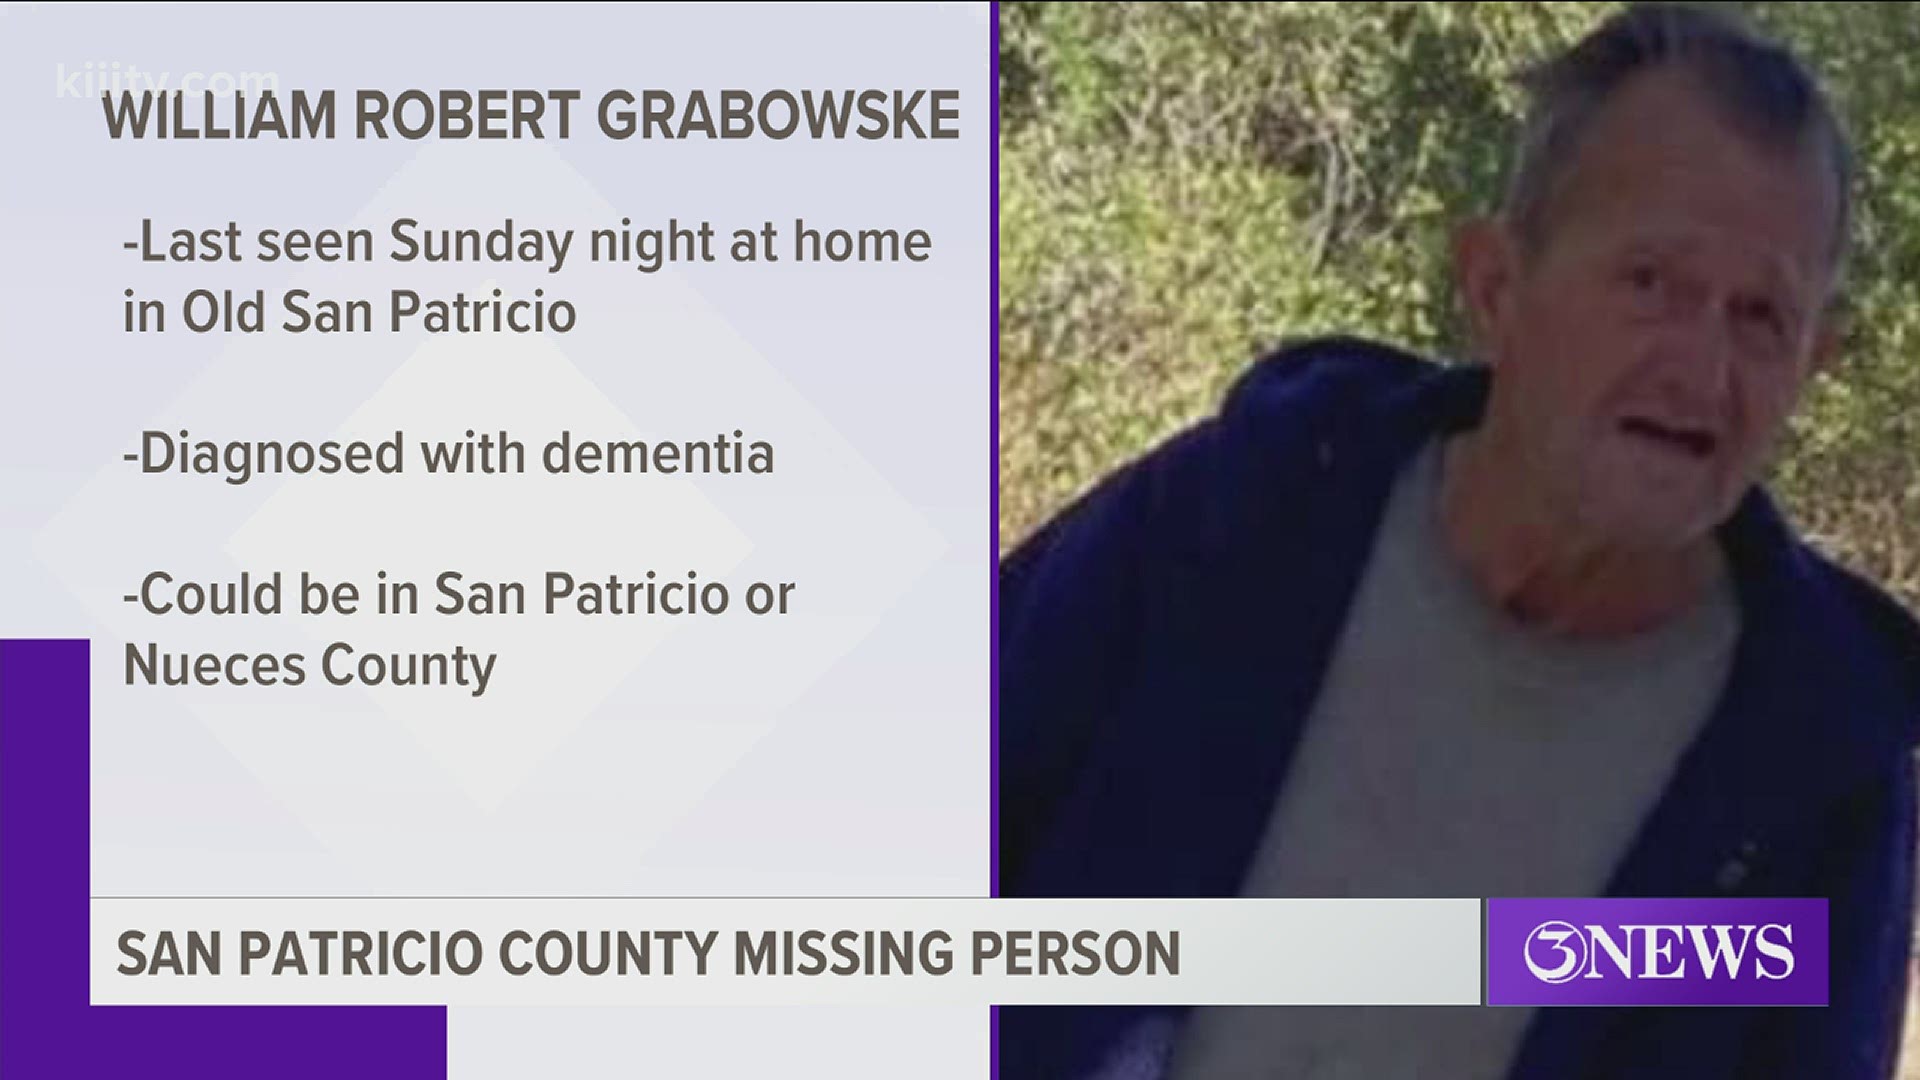 William Robert Grabowske, 83, was last seen Sunday, Feb. 21 around his home in Peaceful Valley in Old San Patricio, officials said.